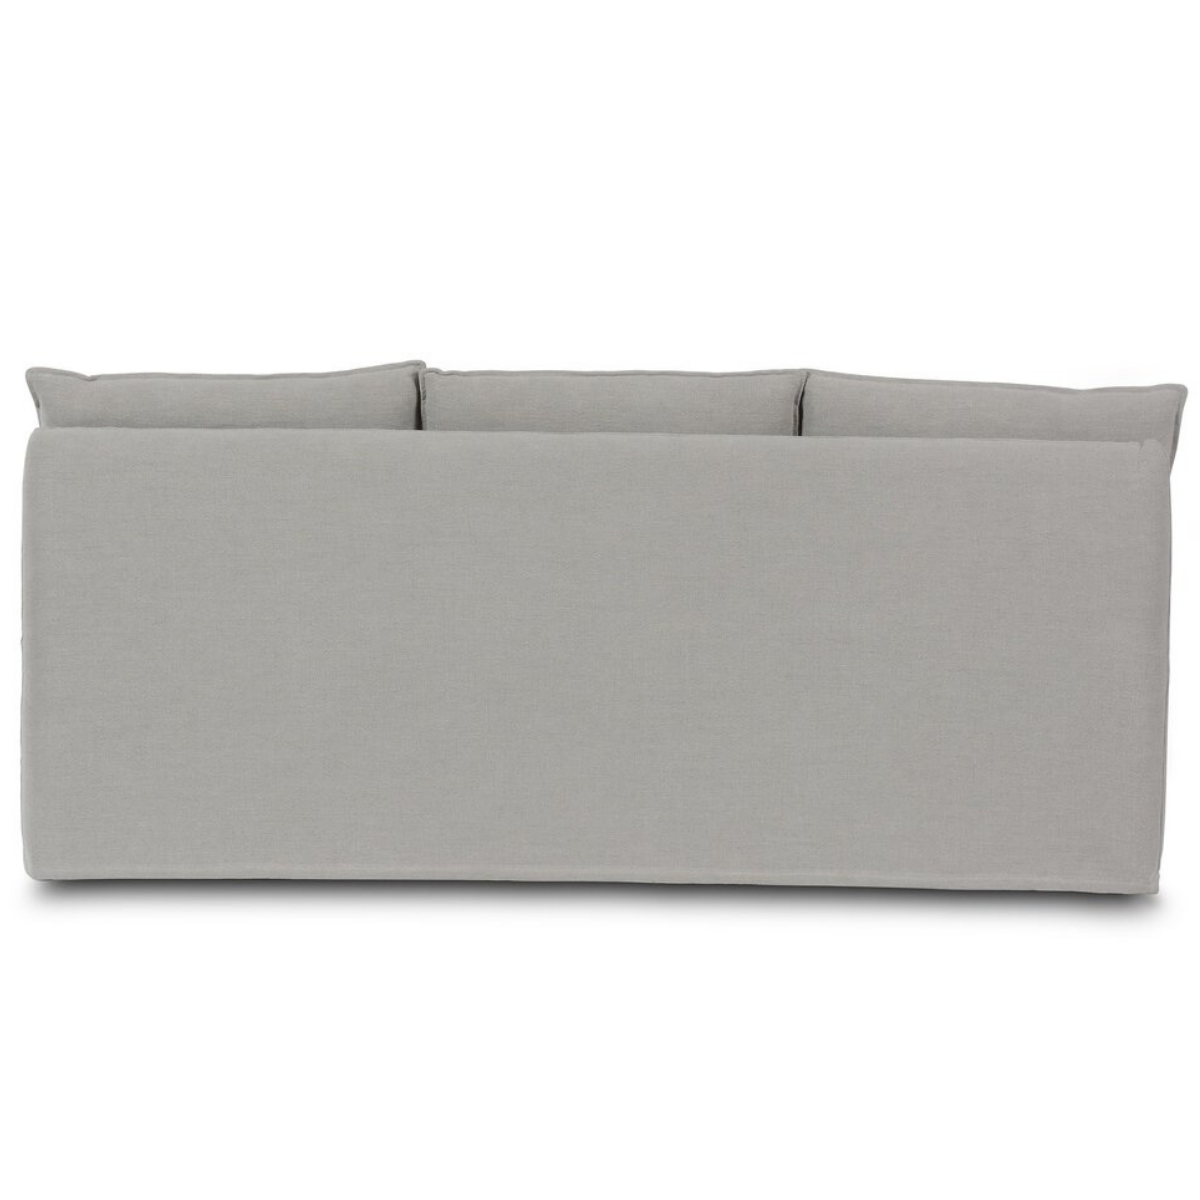 Build Your Own: Andre Slipcover Dining Banquette